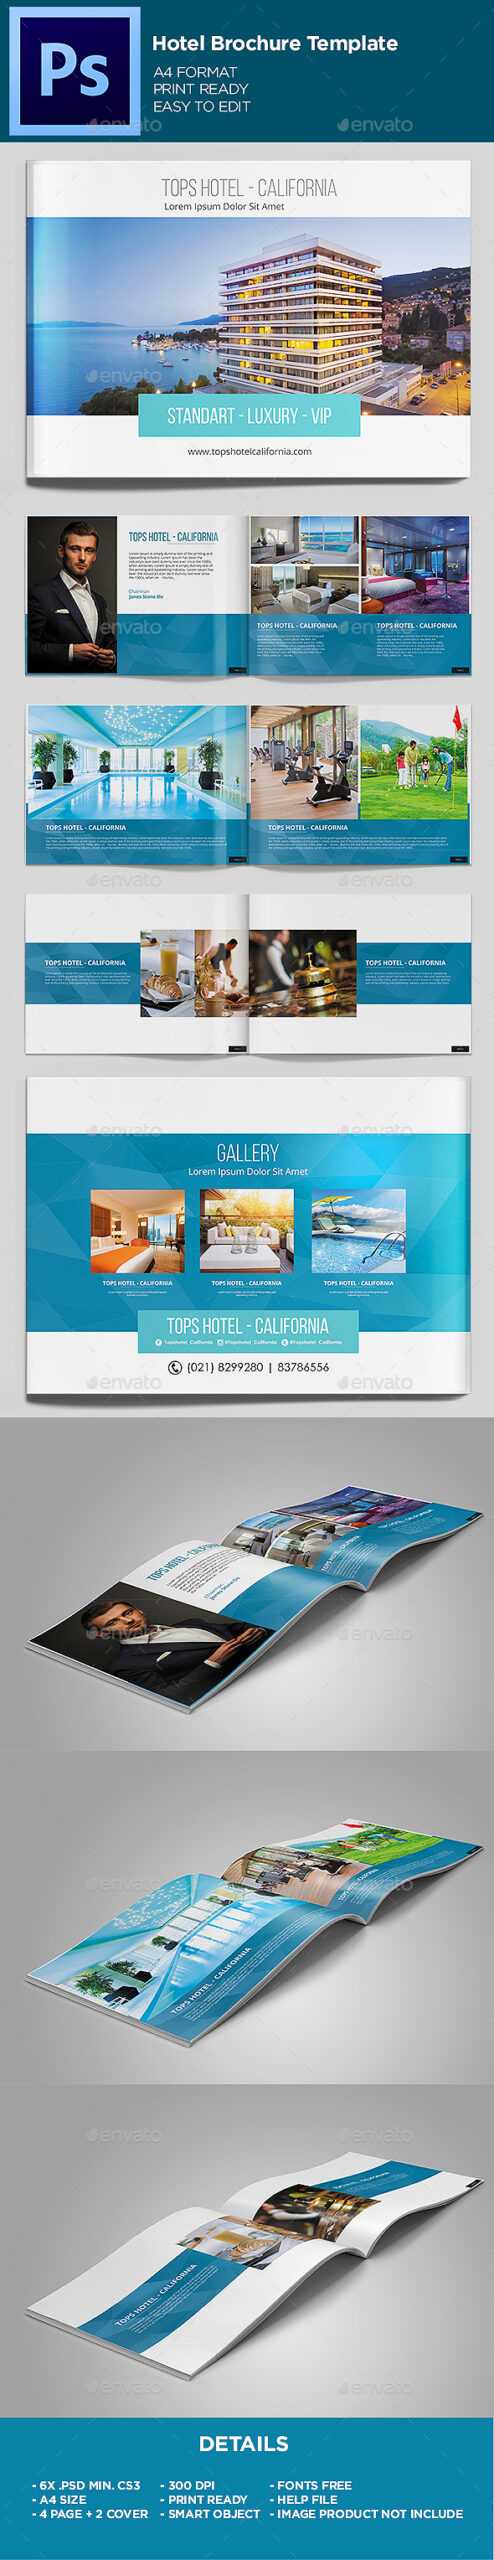 Hotel Brochure Graphics, Designs & Templates From Graphicriver Intended For Hotel Brochure Design Templates